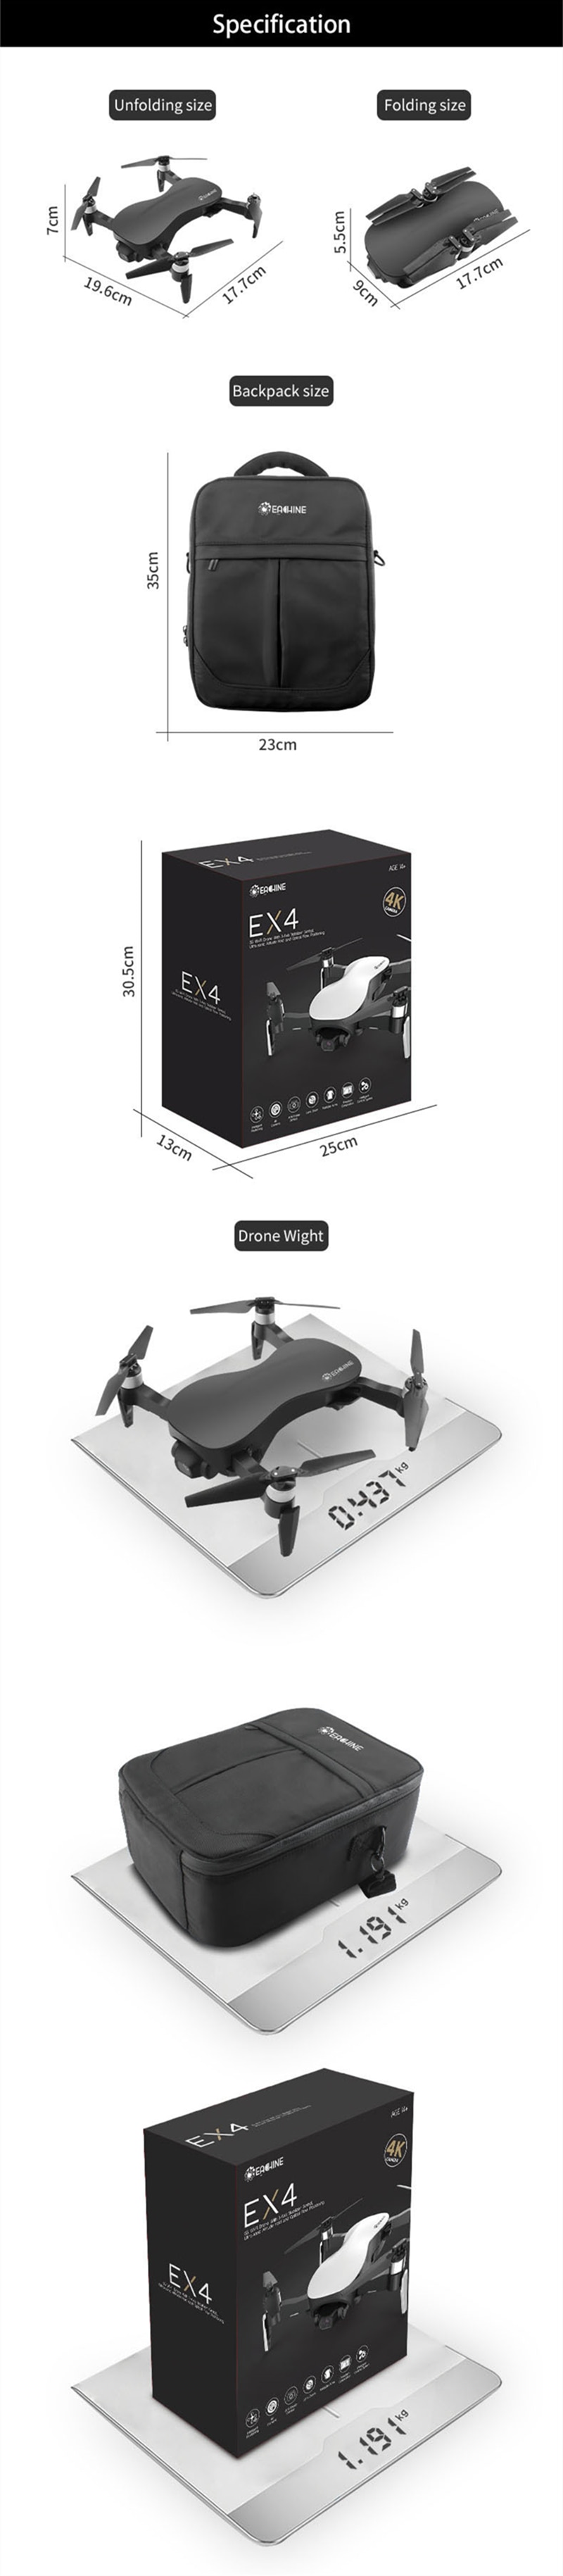 Eachine EX4 5G WIFI 1.2KM FPV GPS With 4K HD Camera 3-Axis Stable Gimbal 25 Mins Flight Time RC Drone Quadcopter RTF VS X12